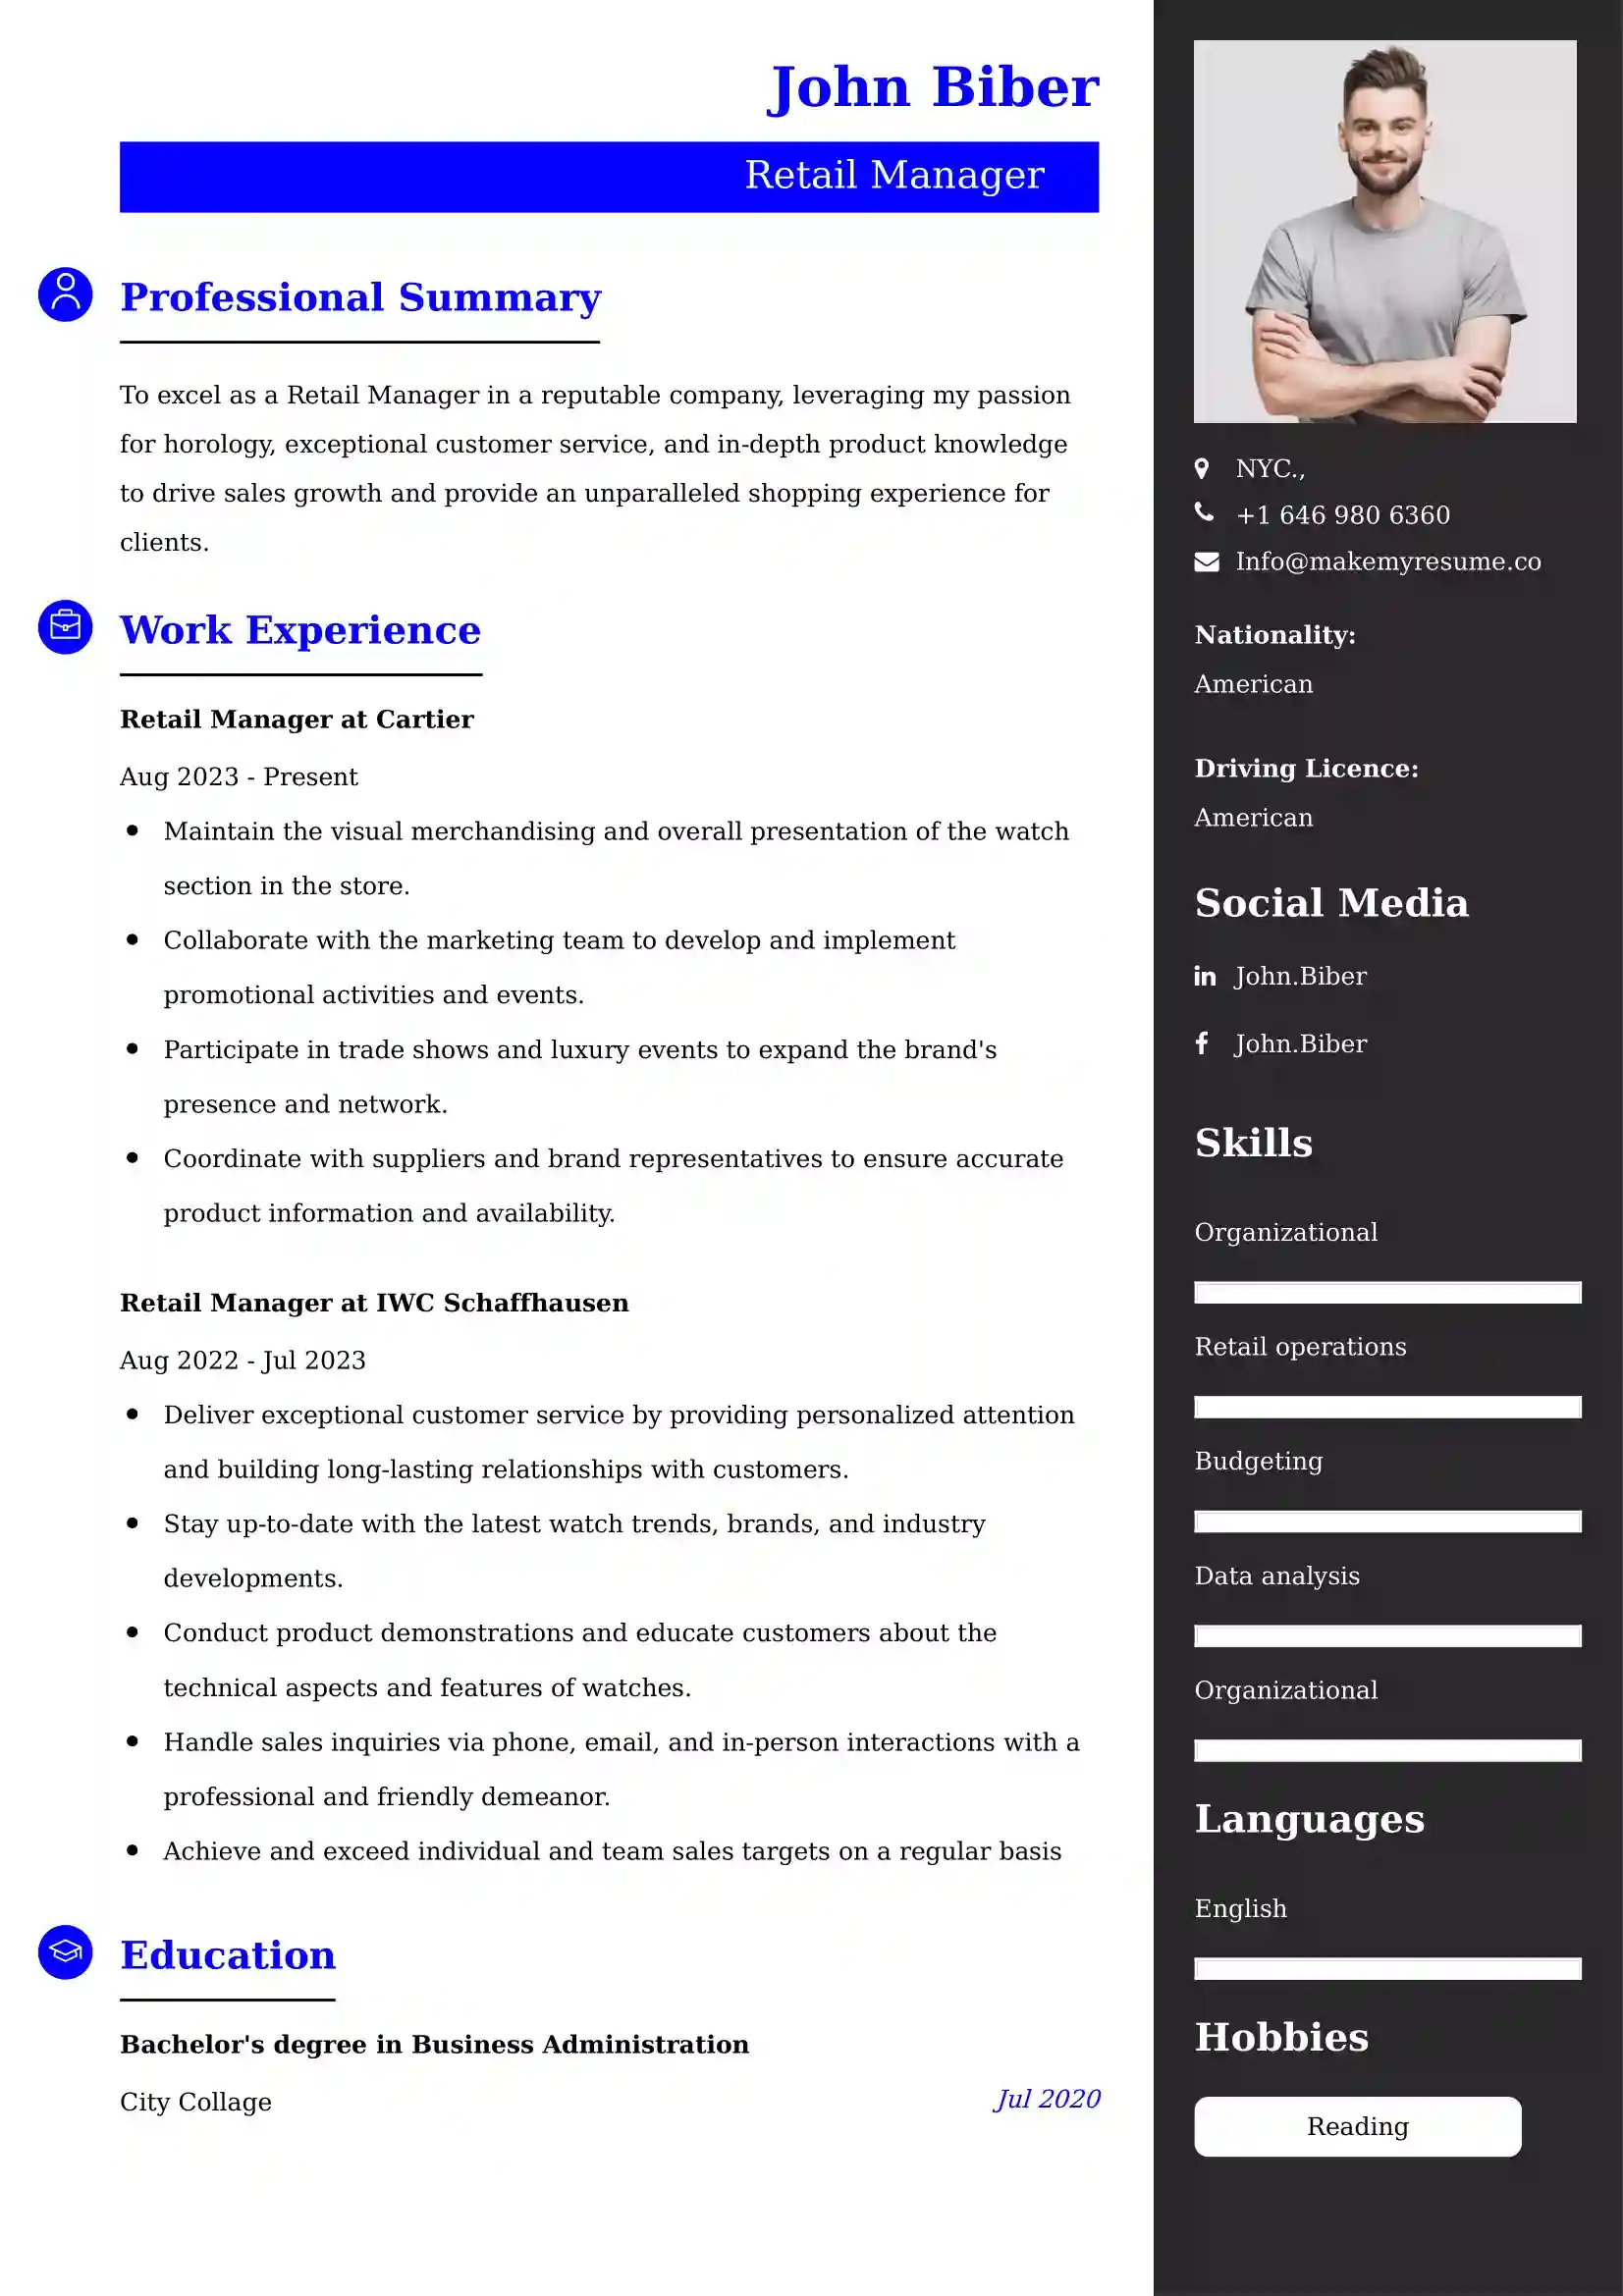 Retail Manager CV Examples - US Format